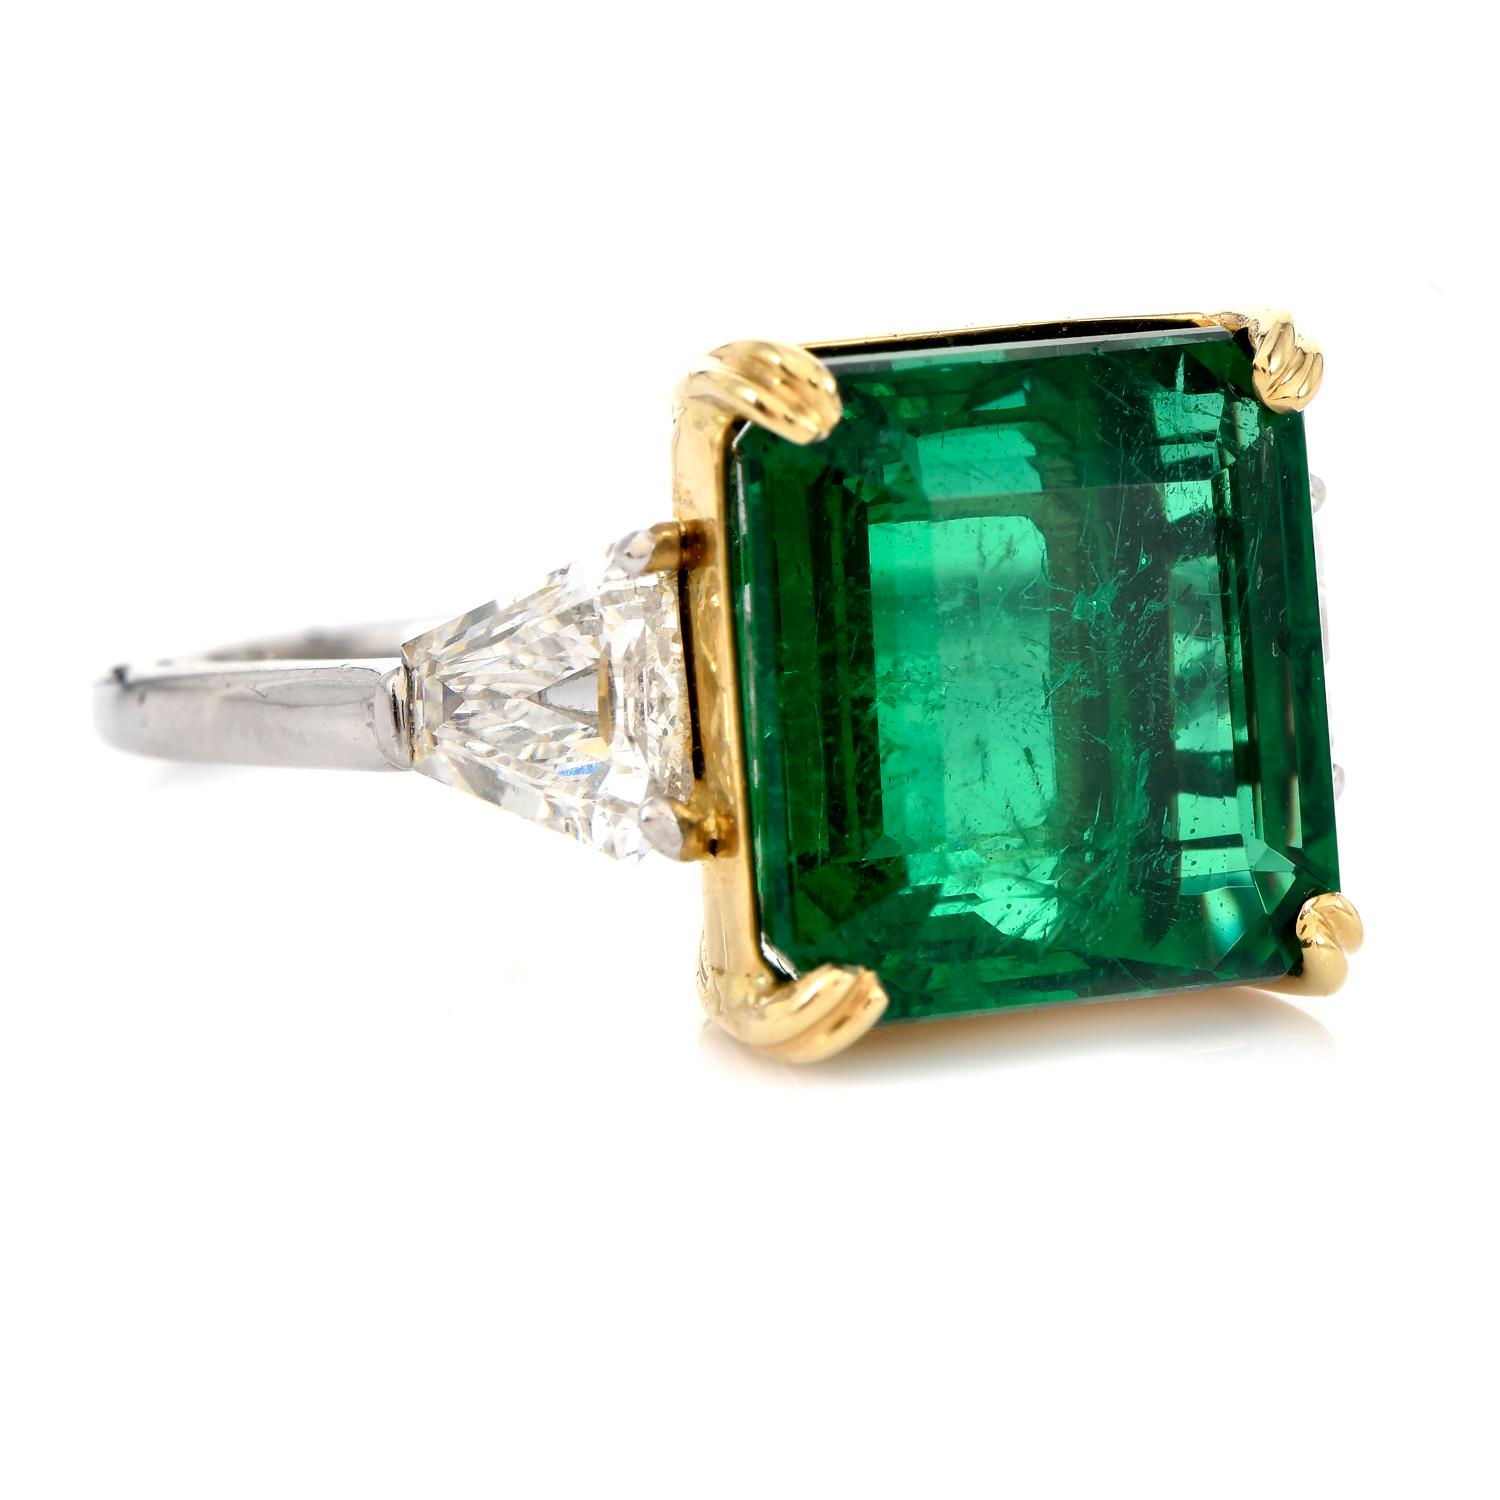 Certified  9.02cts Zambian Emerald Diamond Platinum Cocktail Ring In Excellent Condition For Sale In Miami, FL